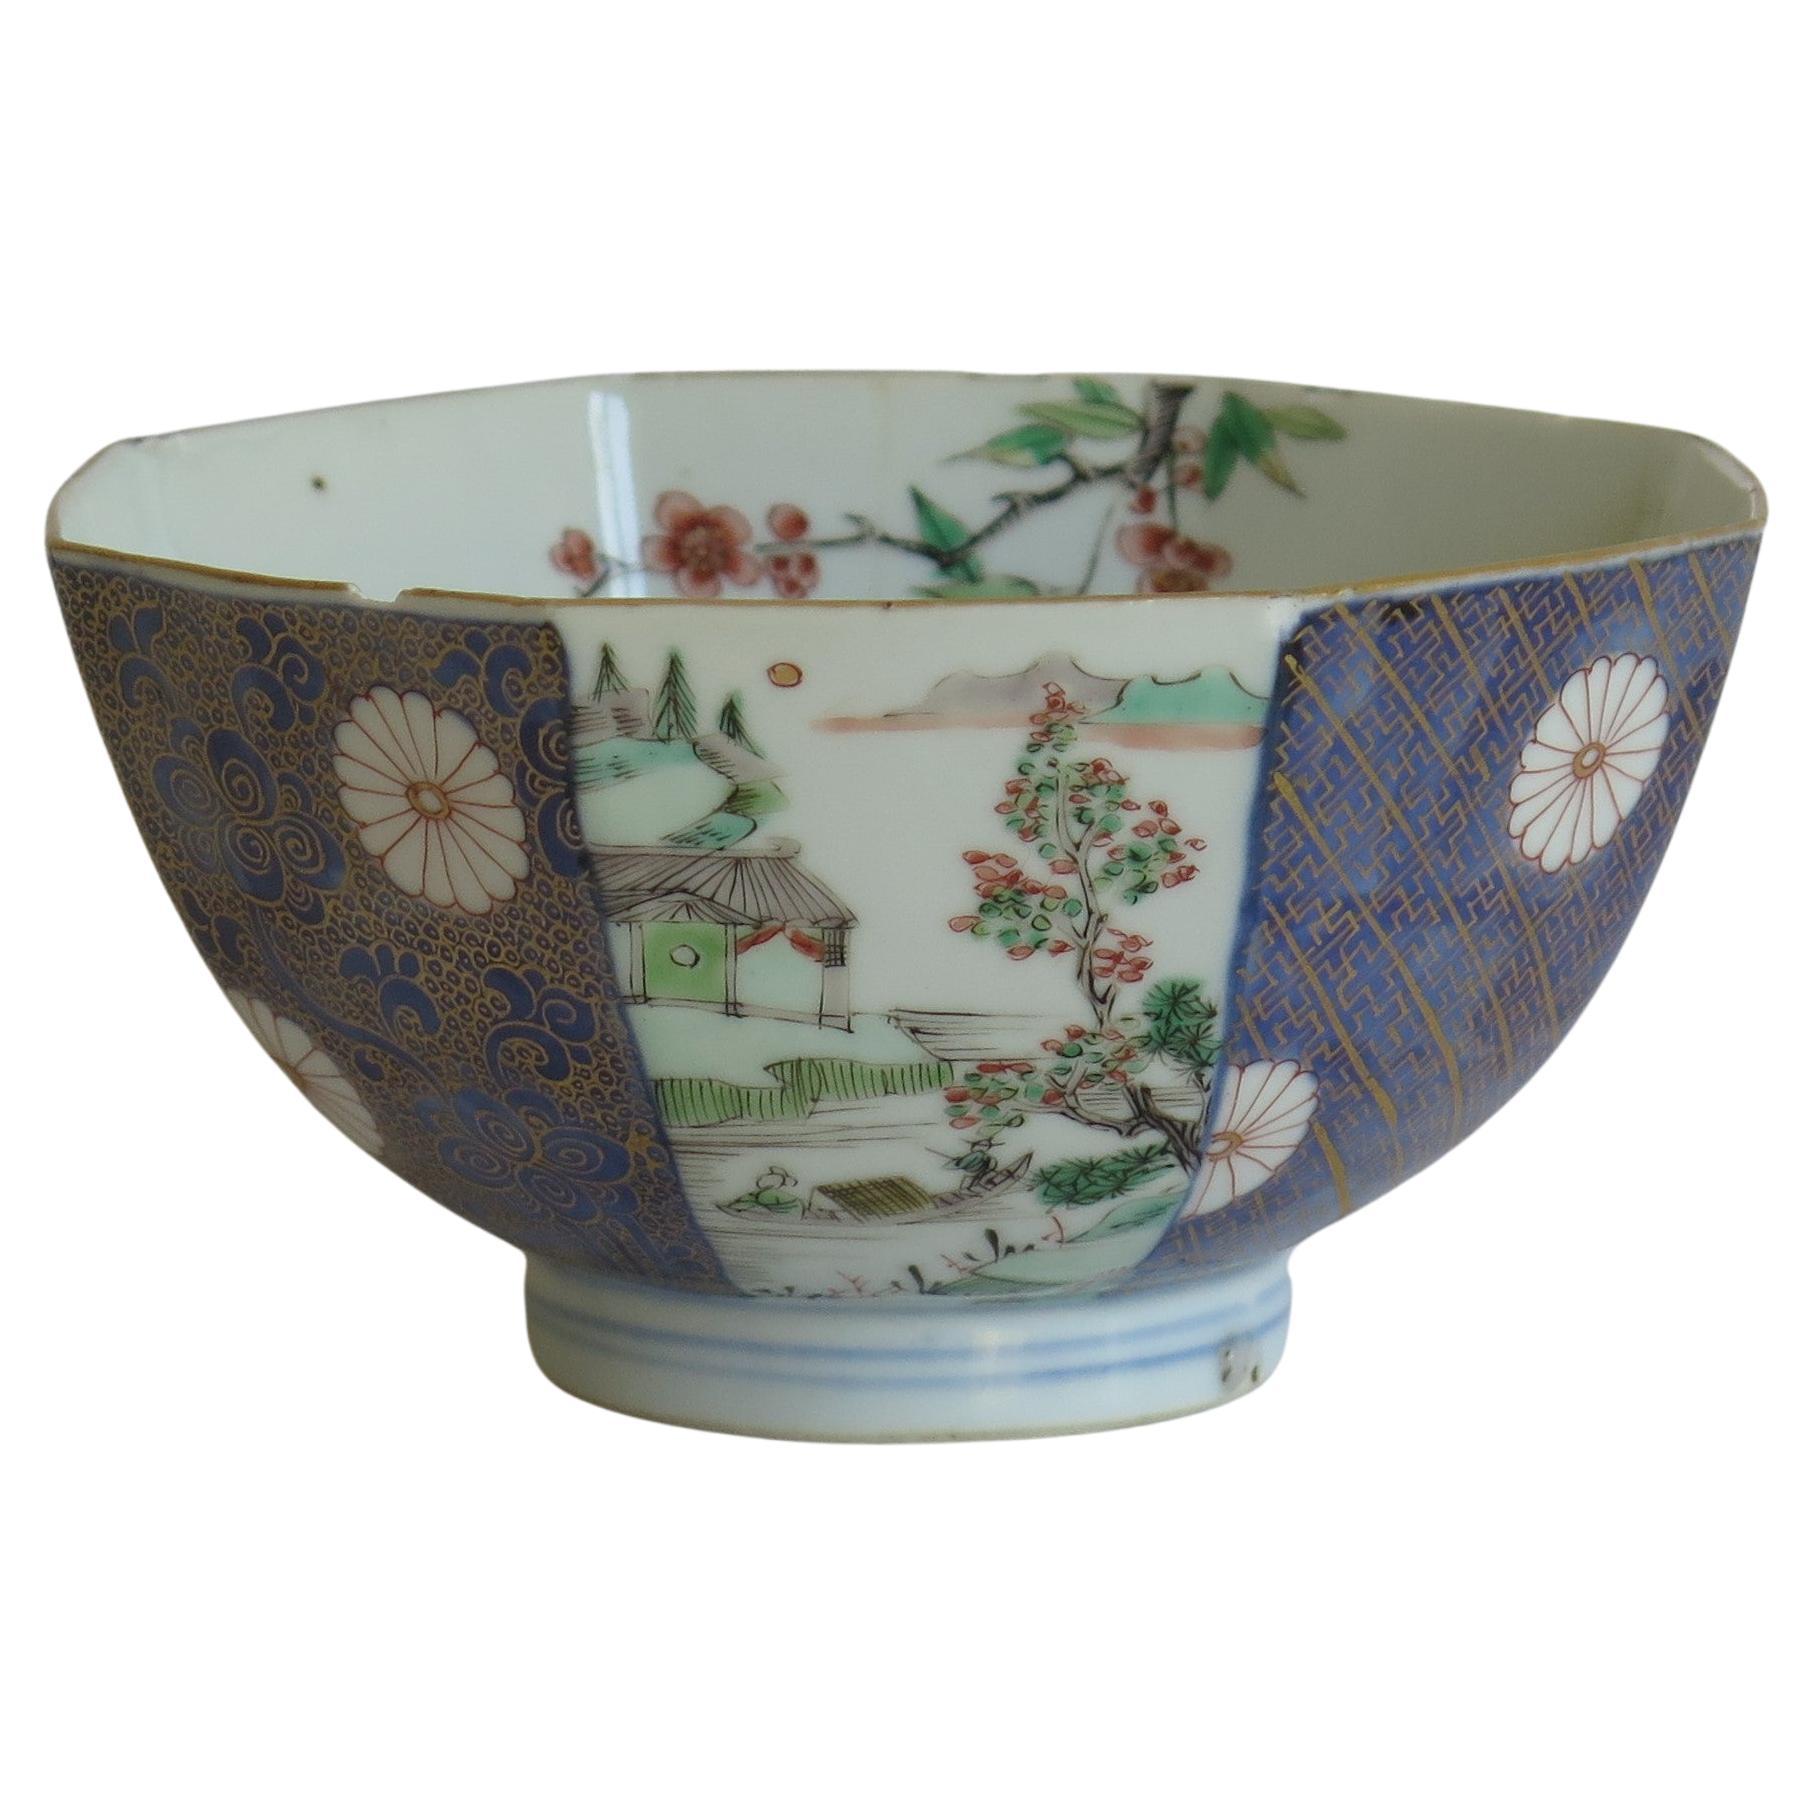 This is a beautiful Chinese export porcelain octagonal footed bowl that we date to the early 18th Century Qing period, circa 1720, either Kangxi or Yongzheng periods.

This bowl is octagonal in shape, well potted on a fairly tall foot. The glaze is